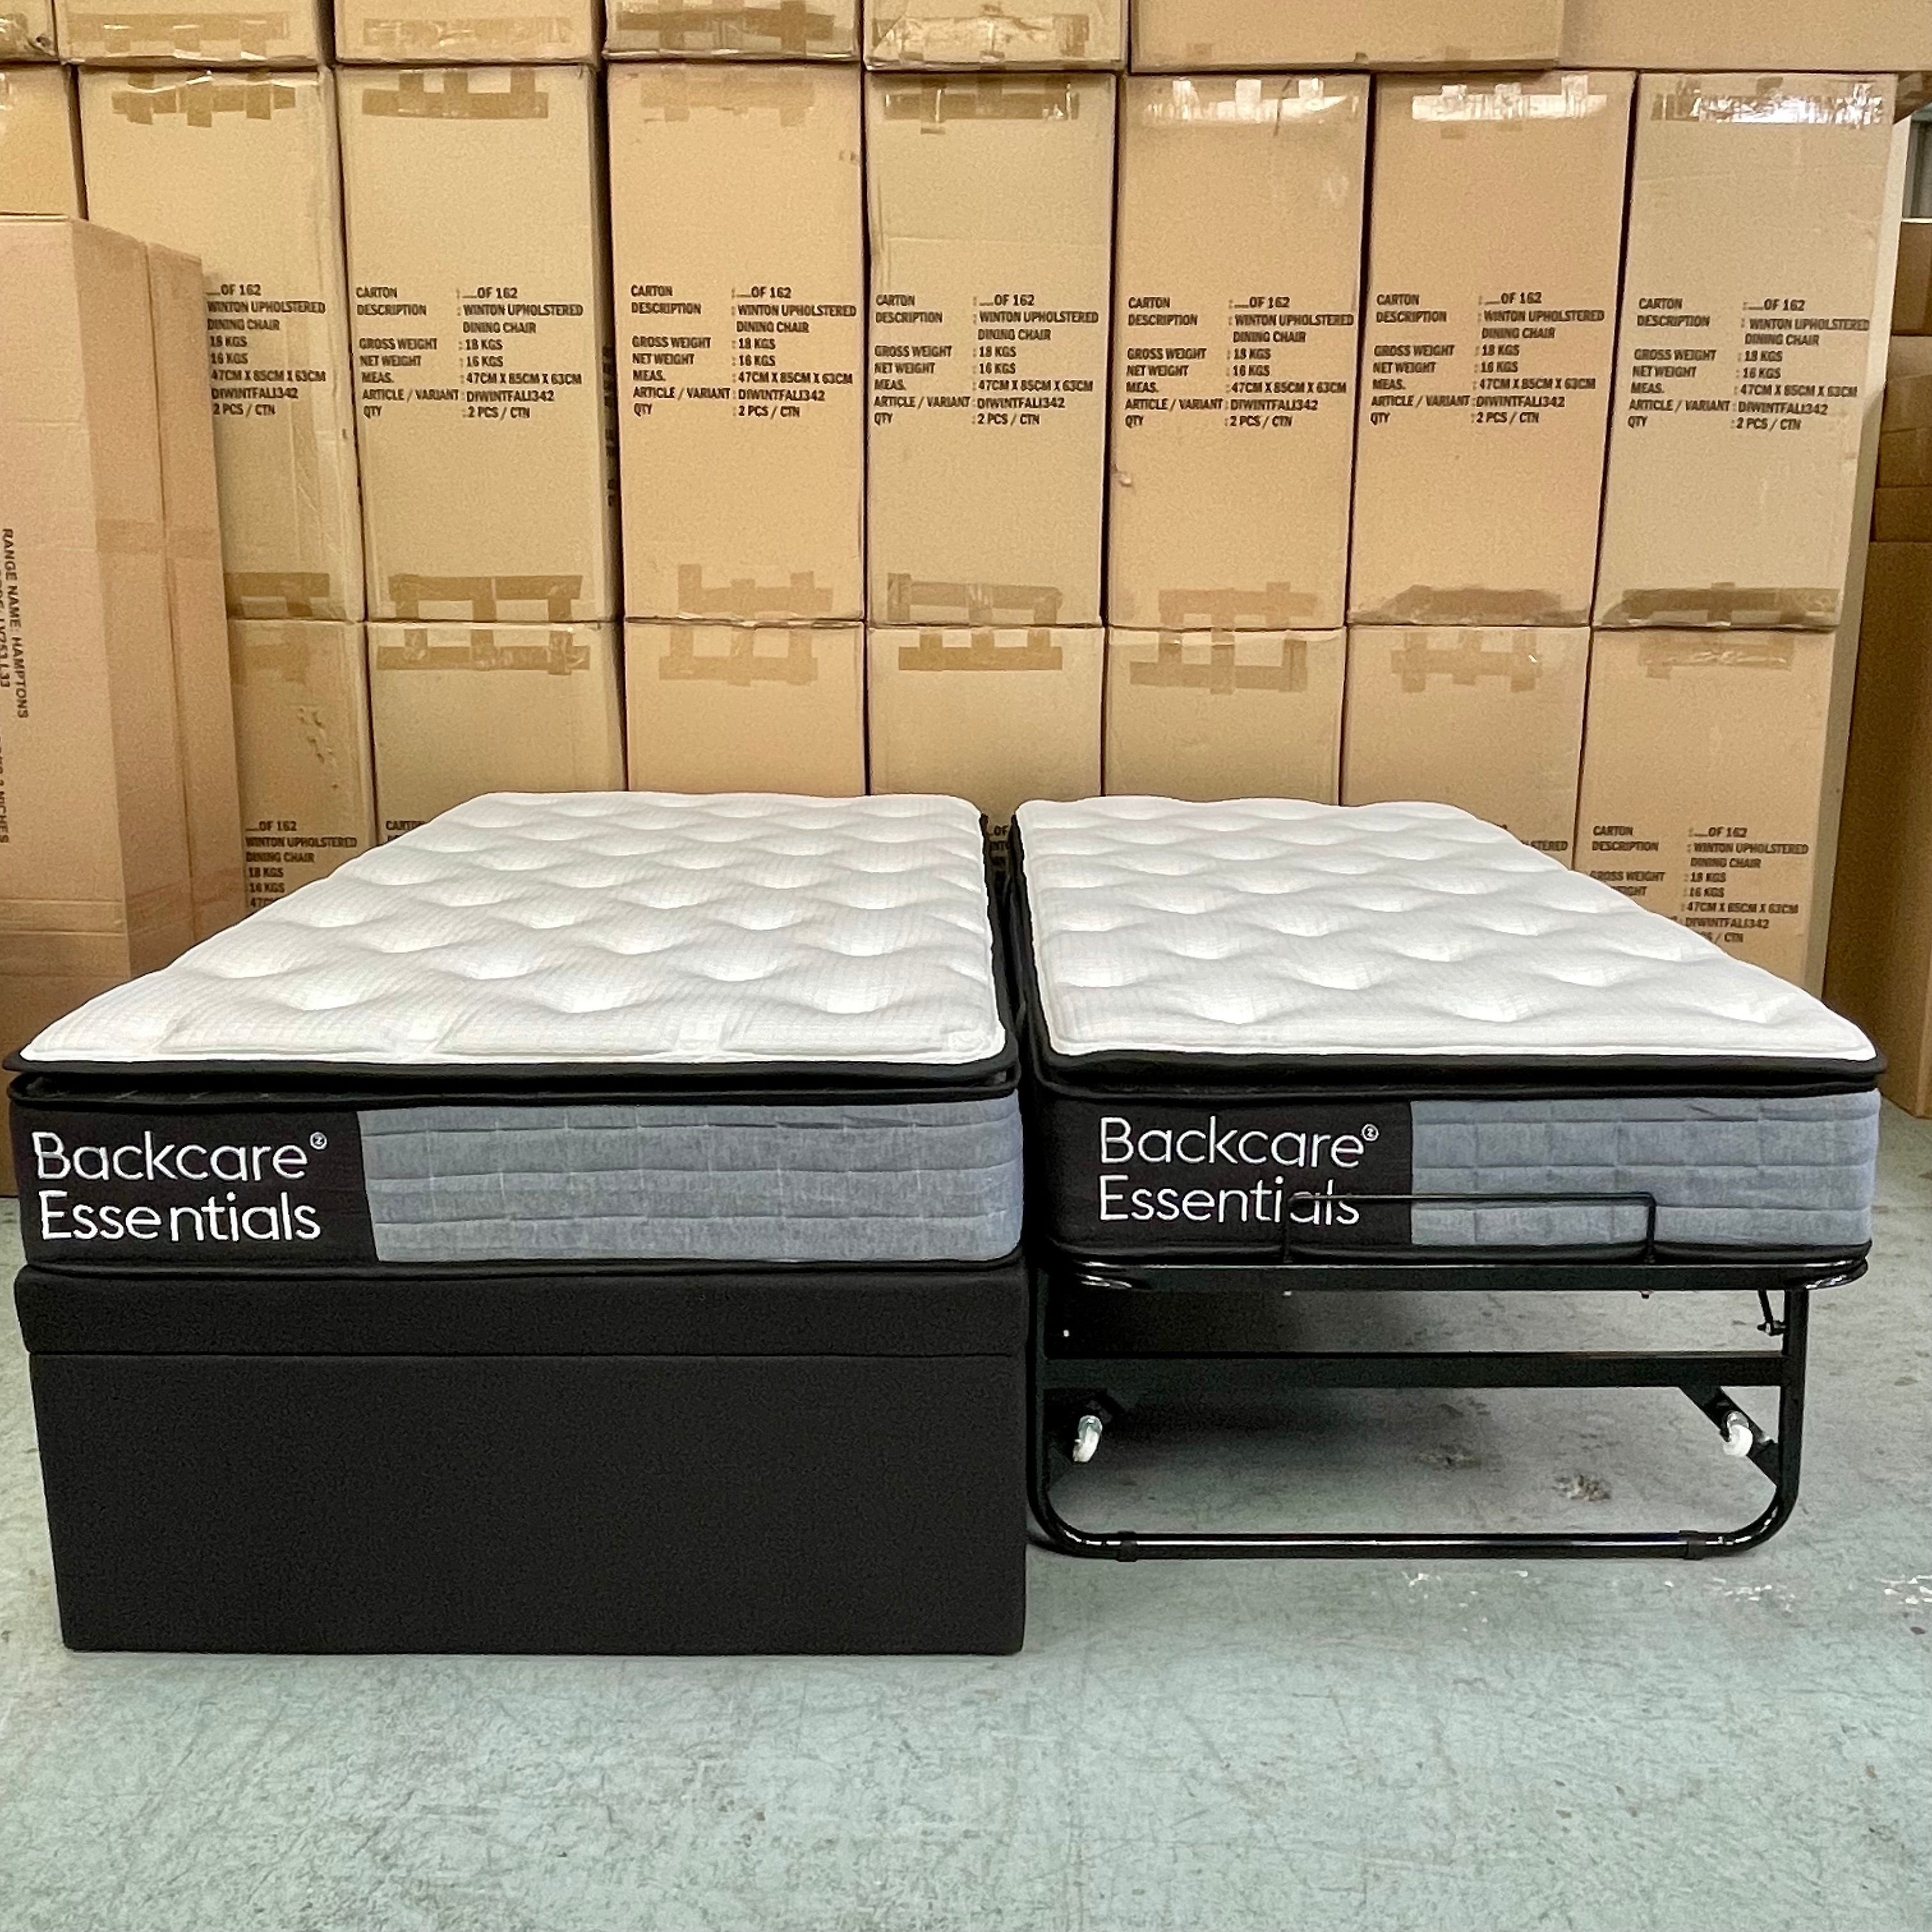 Backcare Trundler Bed set with Backcare Essential Mattresses